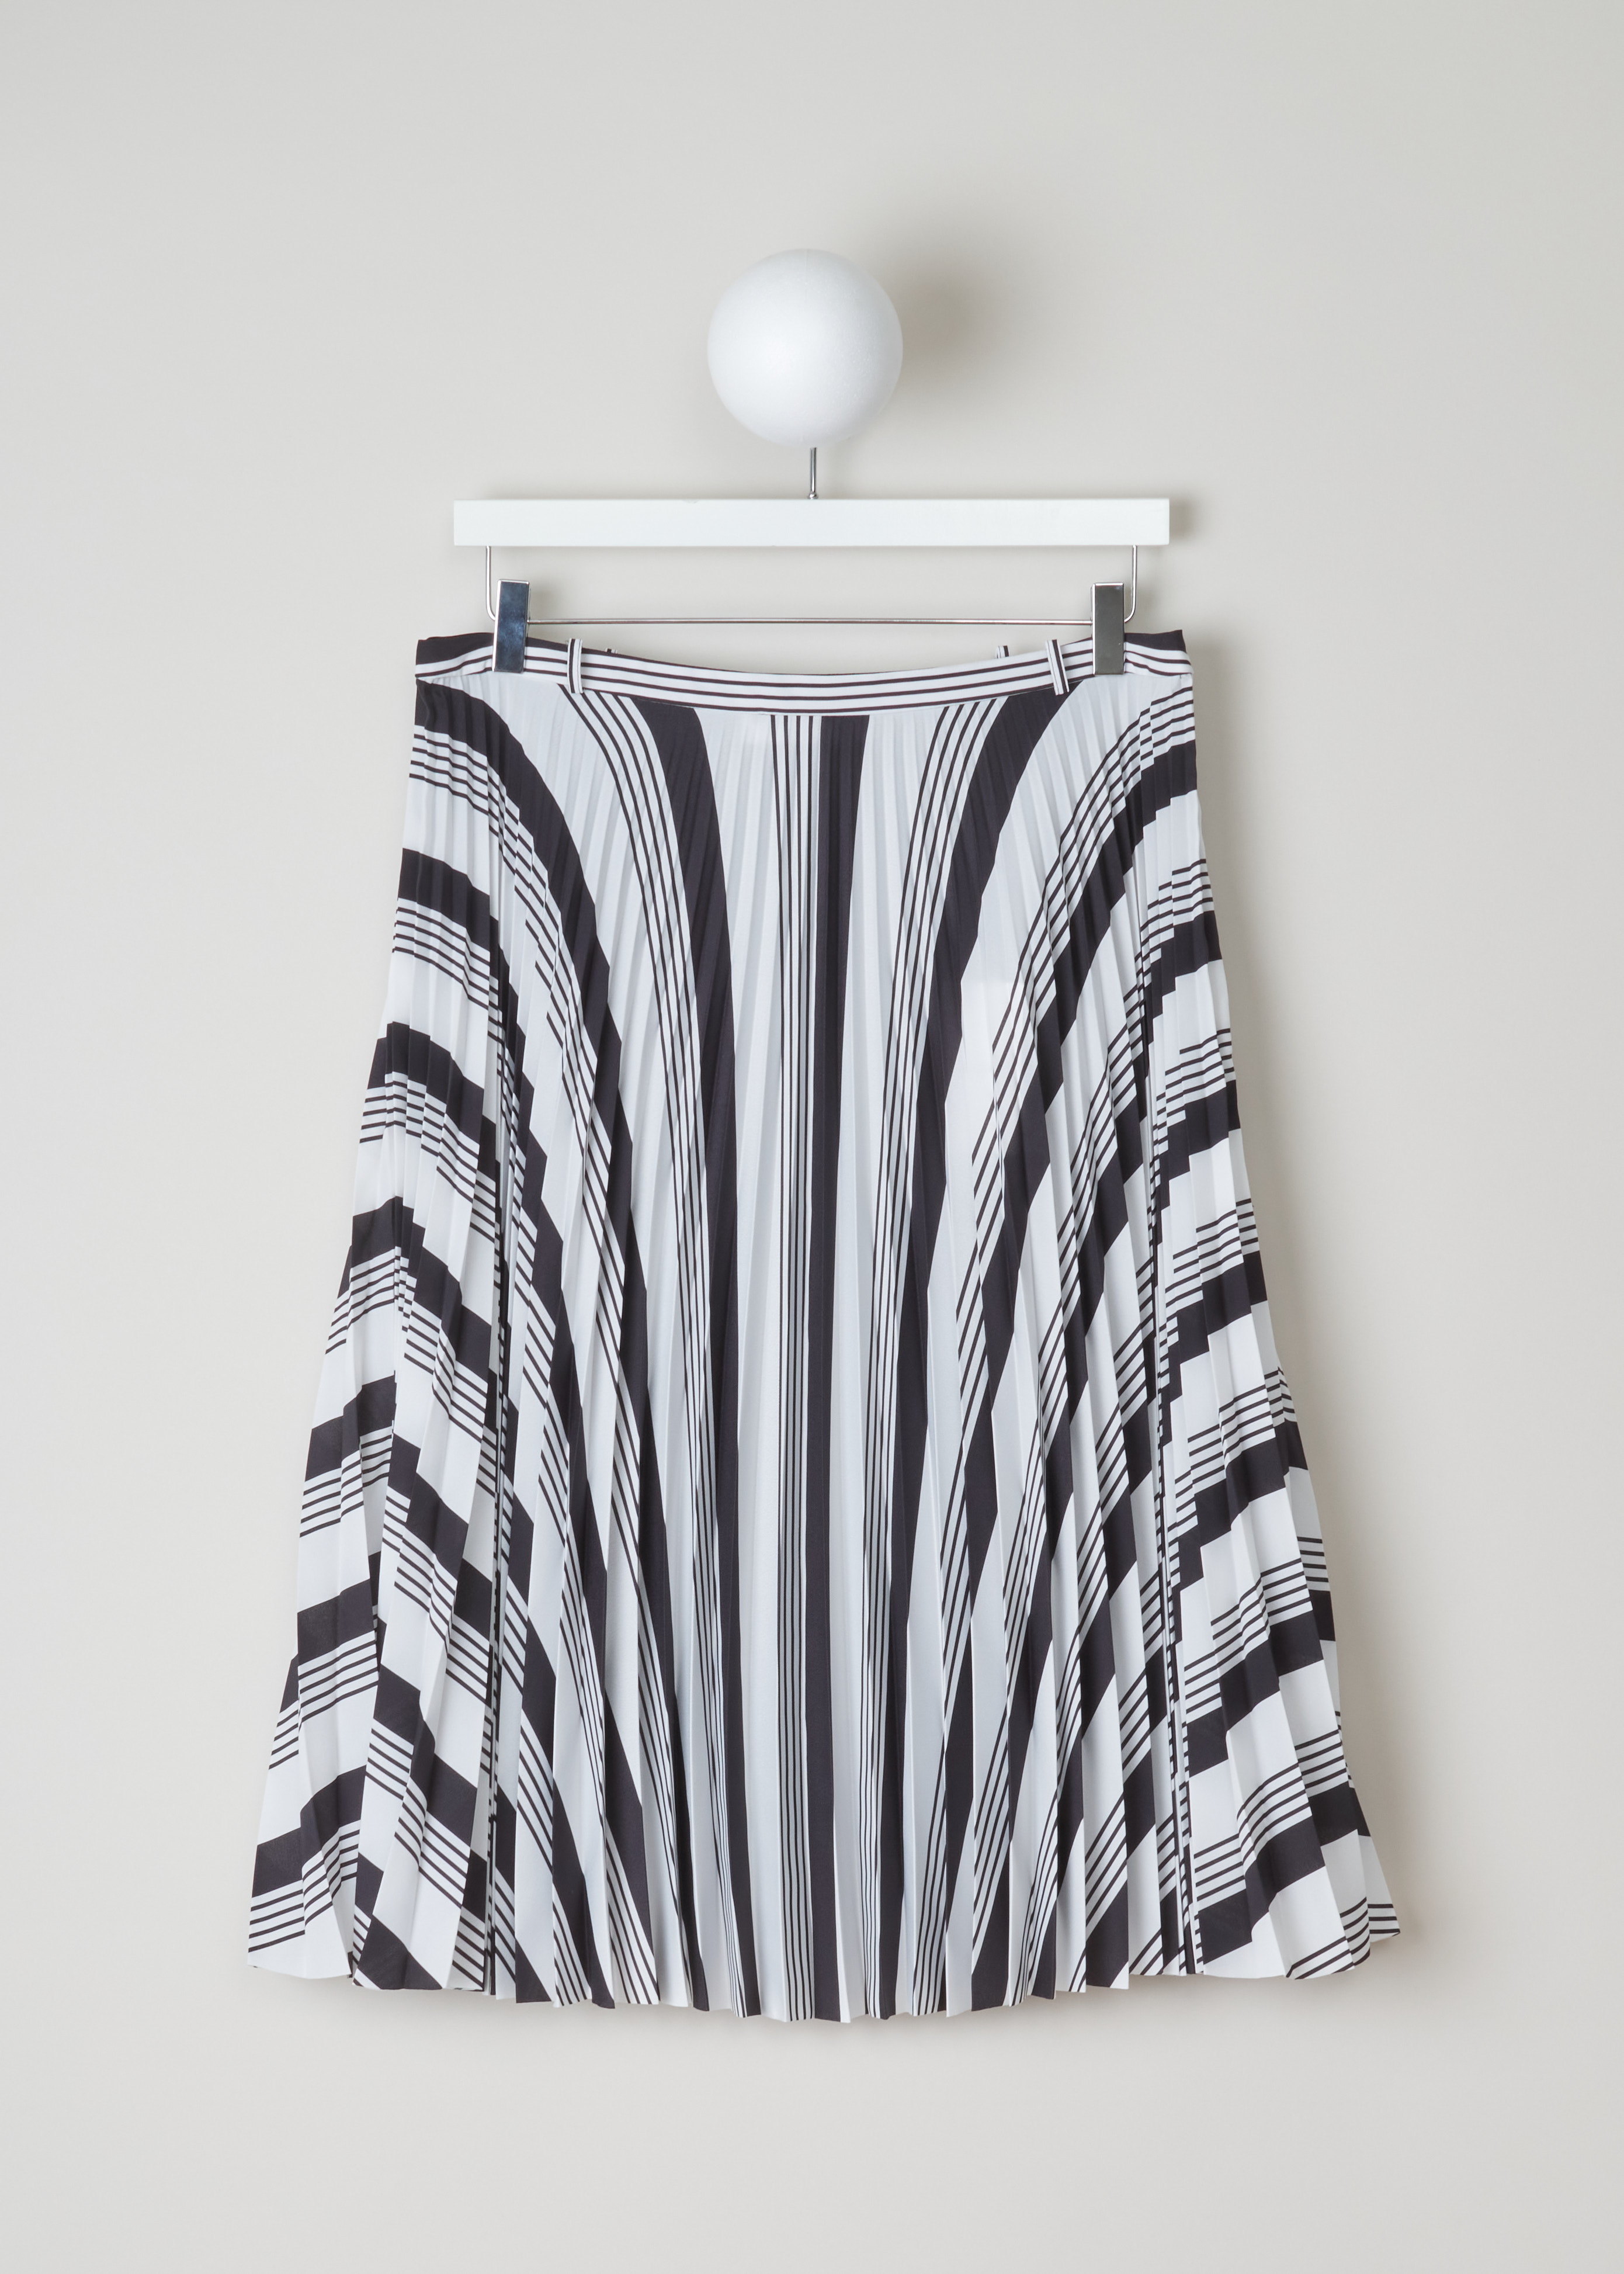 Balenciaga Striped pleated skirt 501971_TYA43_1070 noir blanc front. White plissÃ© skirt with curved black stripe pattern, small waistband with four belt hoops, invisible zipper and slit on the side.